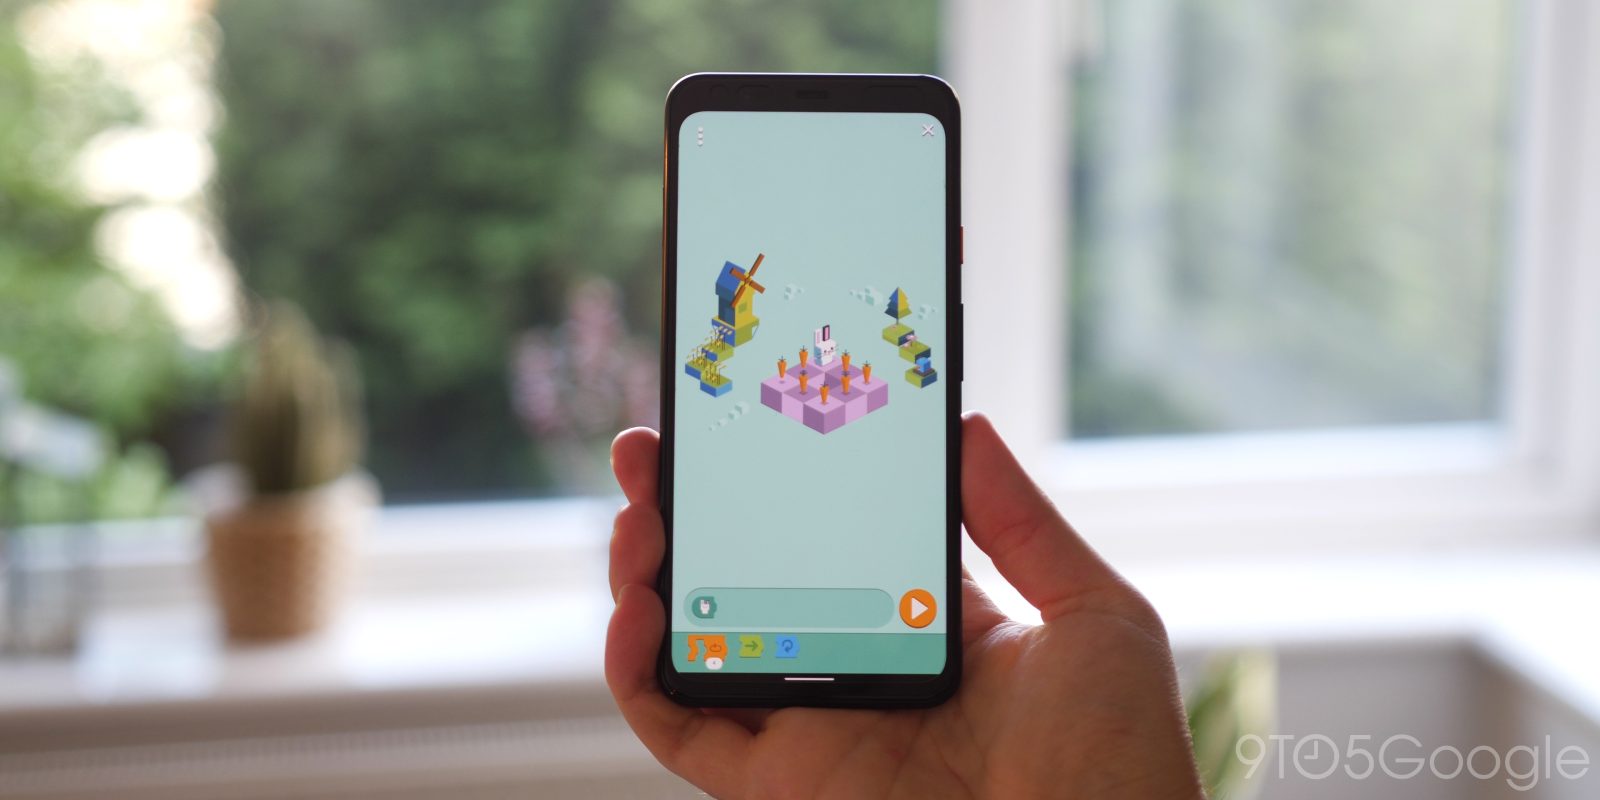 Hands-on with the most popular Google Doodle games